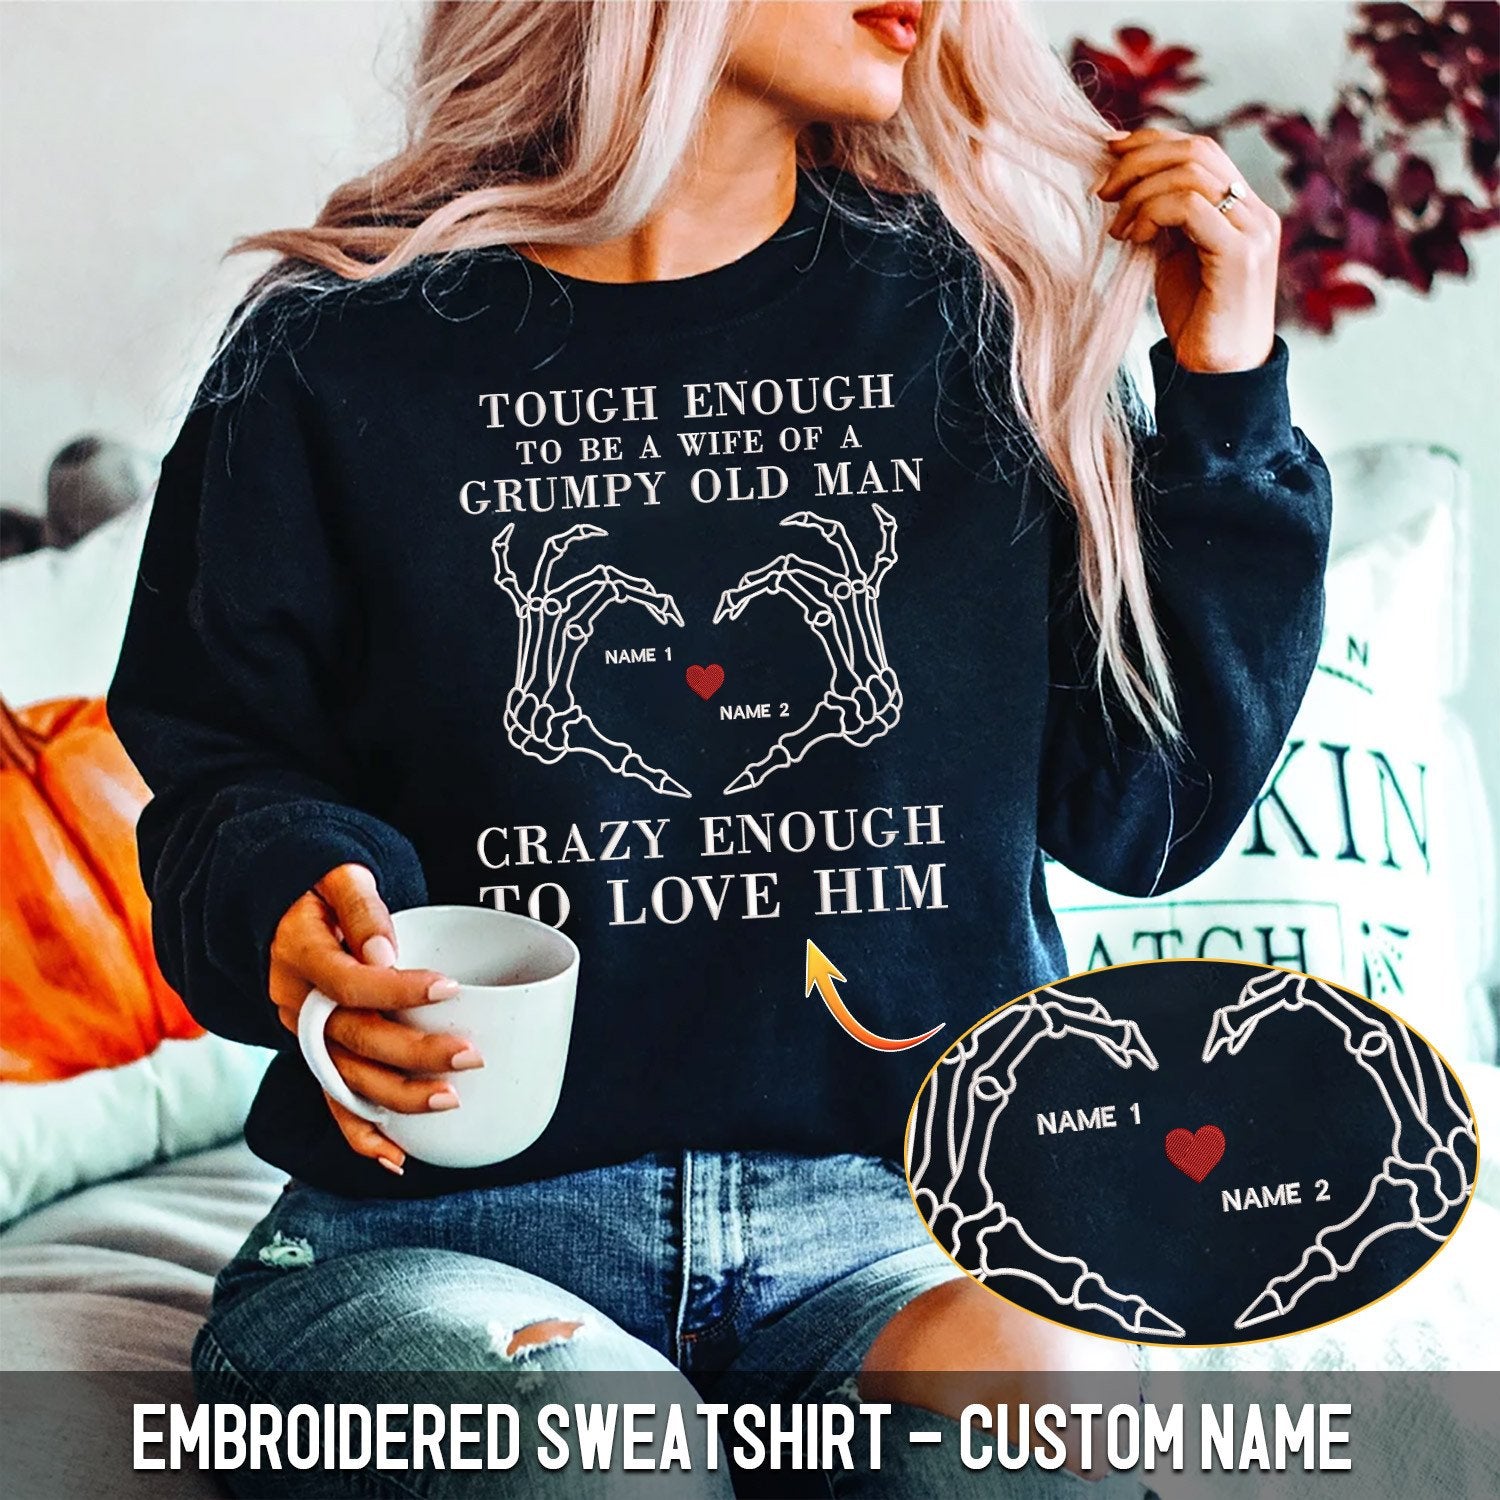 Personalized Tough Enough to be a wife of a grumpy old man Sweatshirt